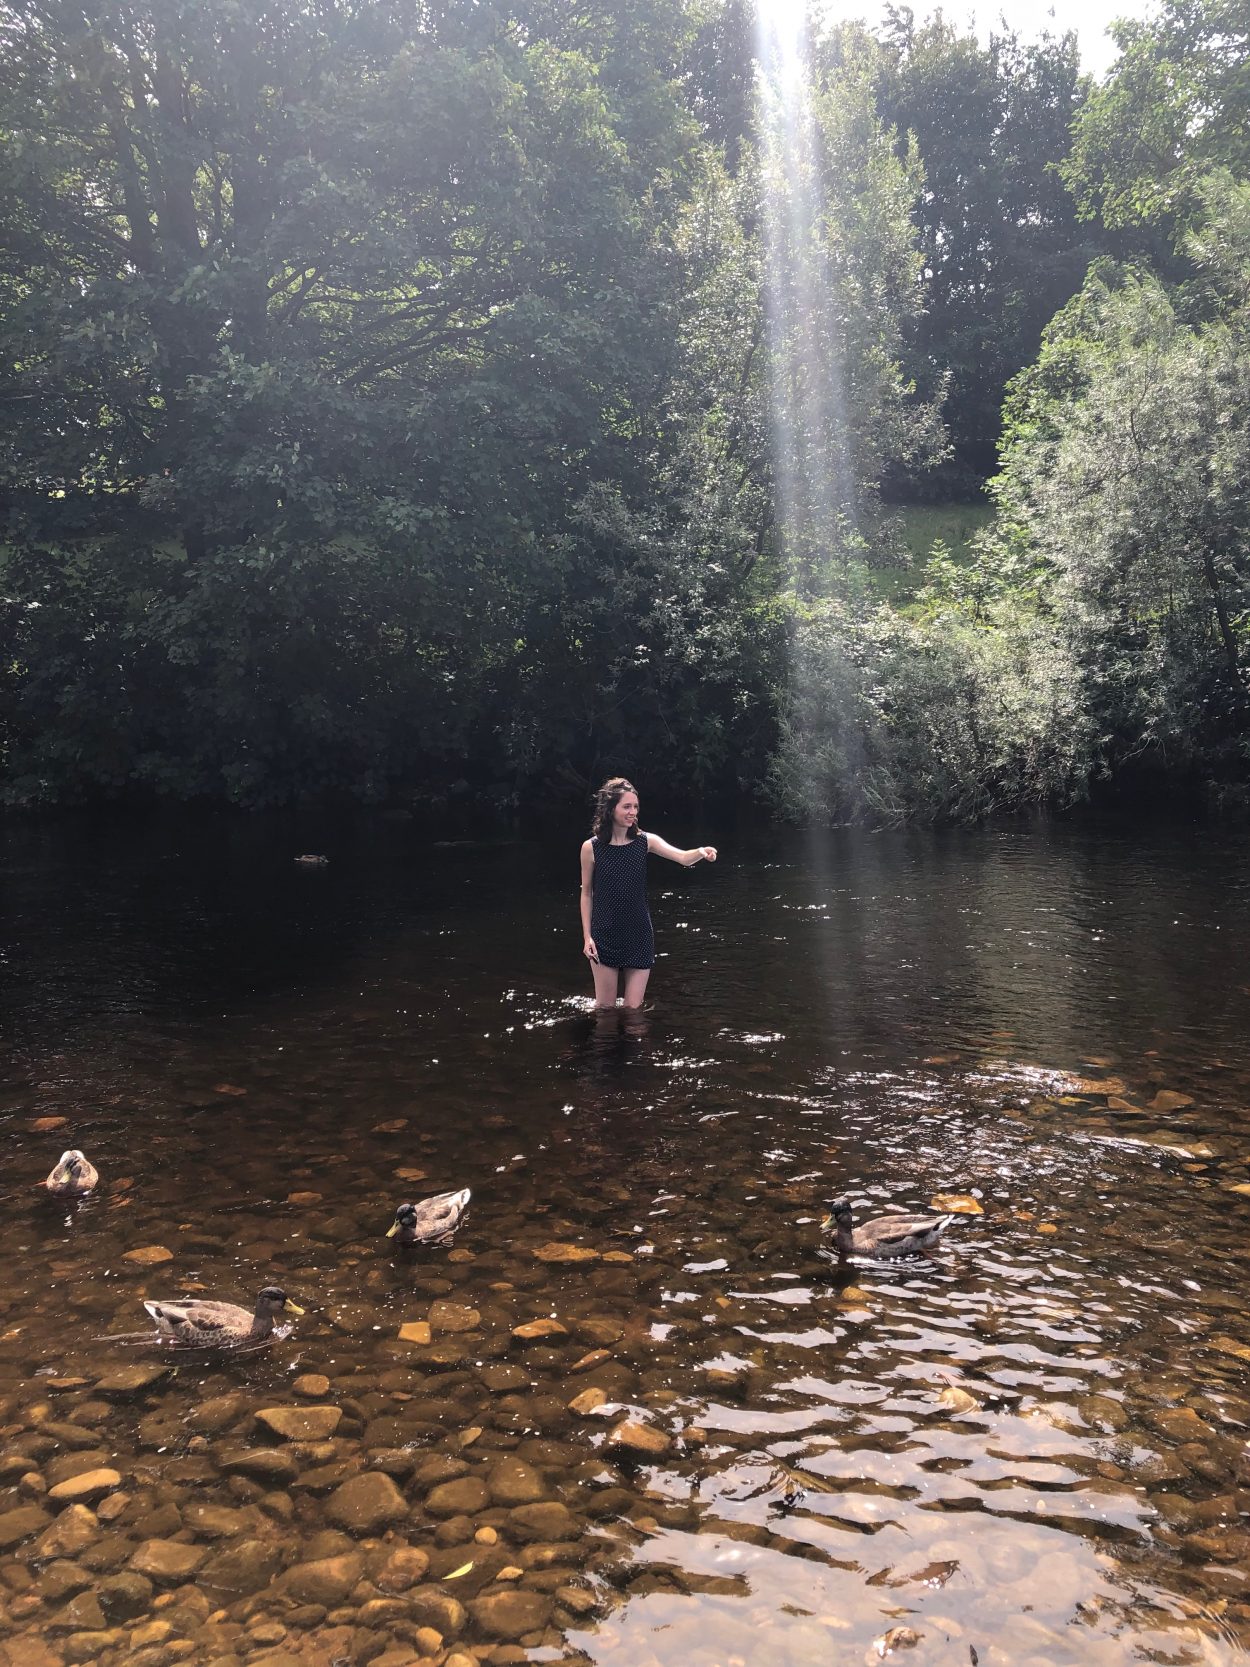 Wading in River Wharfe